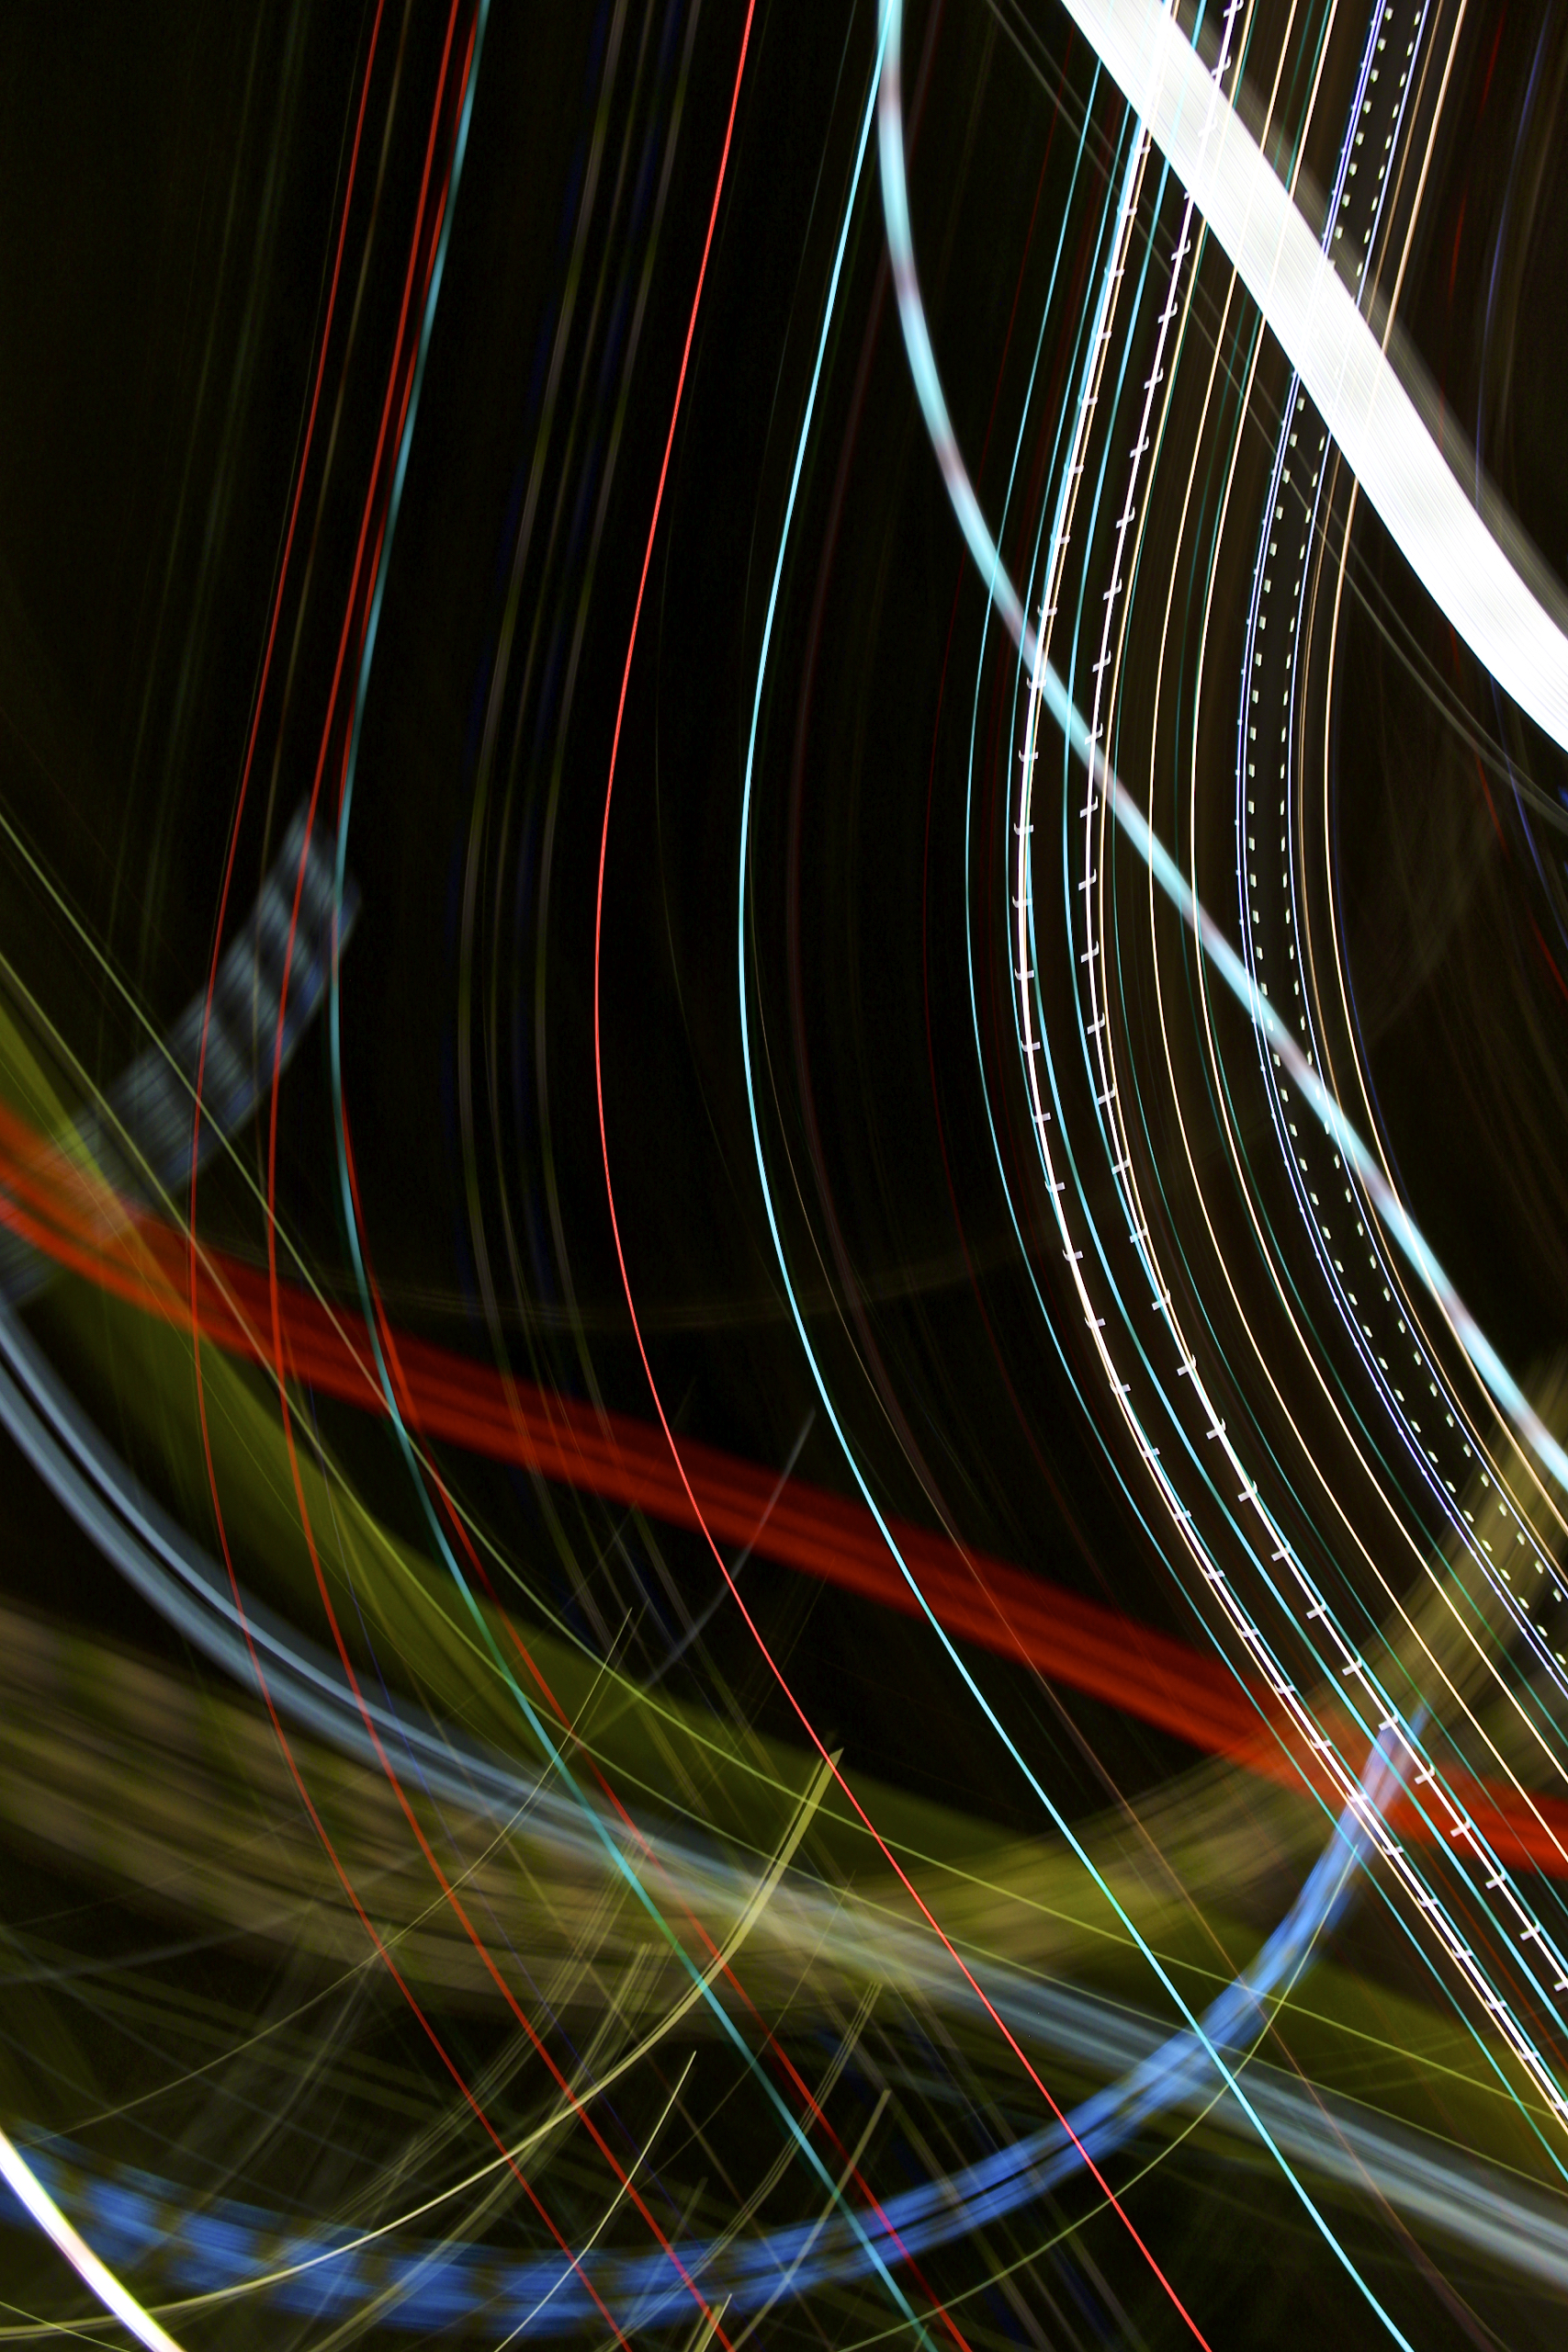 Light Lines Long-exposure Freezelight Colorful Abstraction